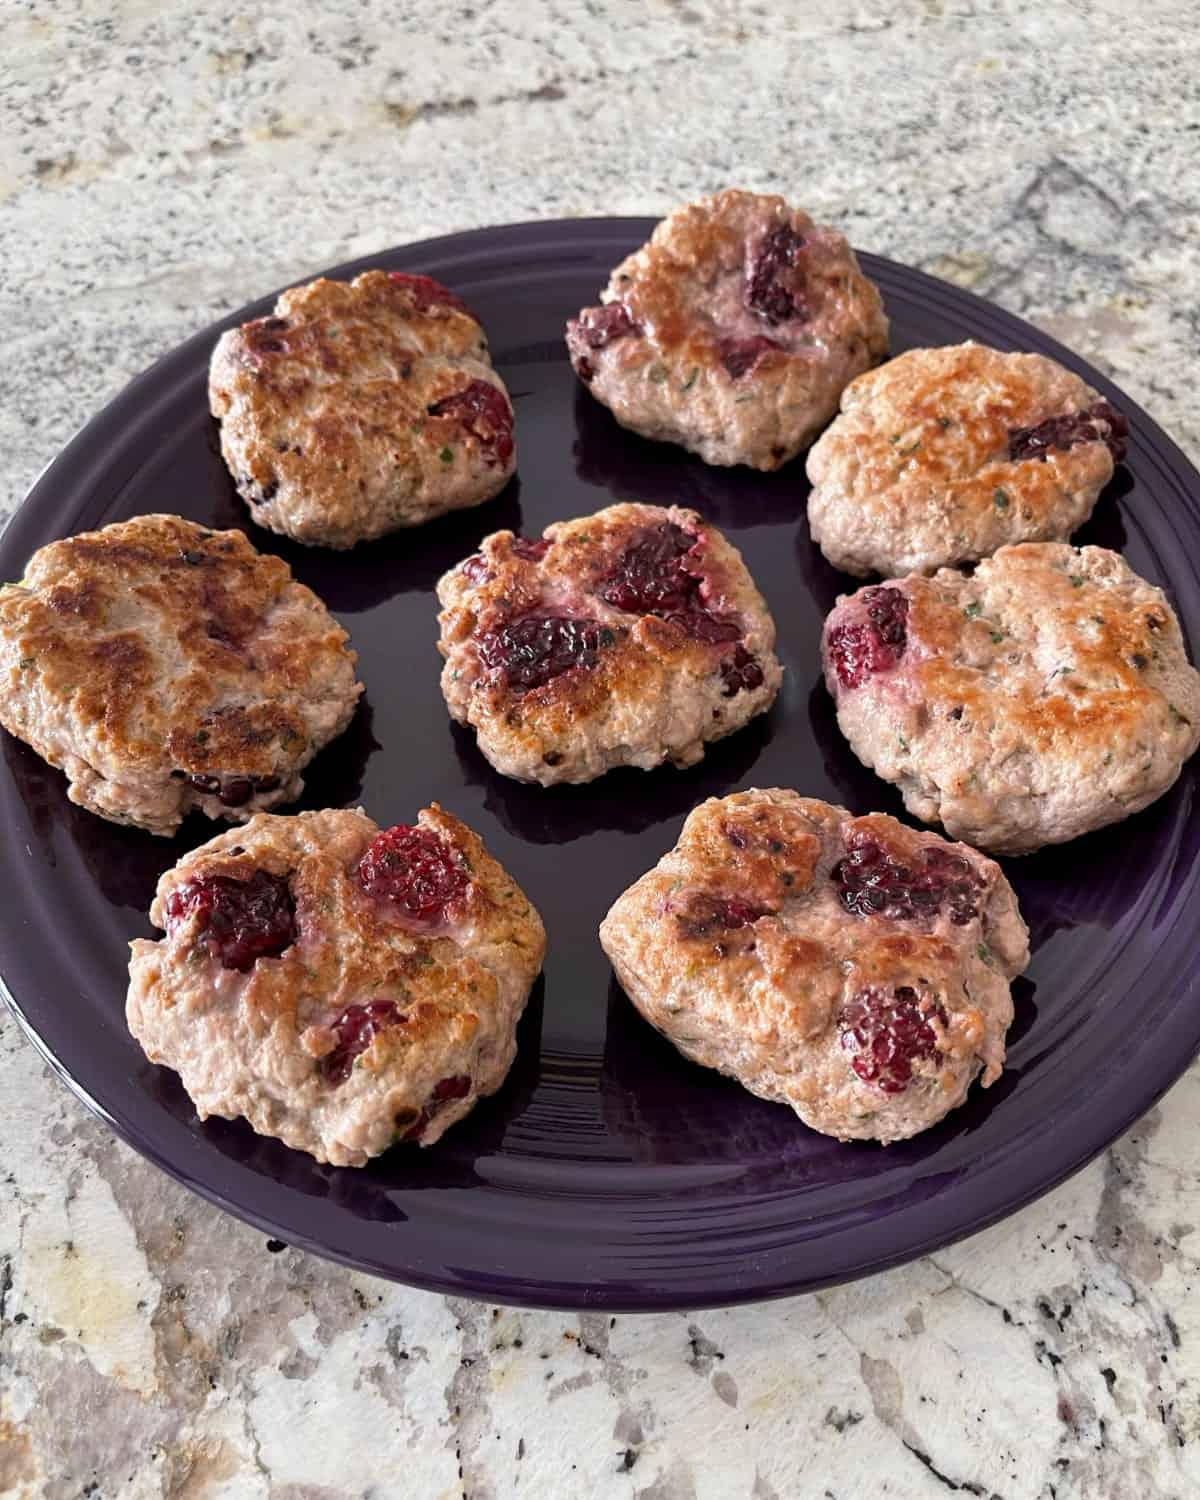 Fresh blackberry breakfast sausage patties with thyme and sage on purple serving platter.